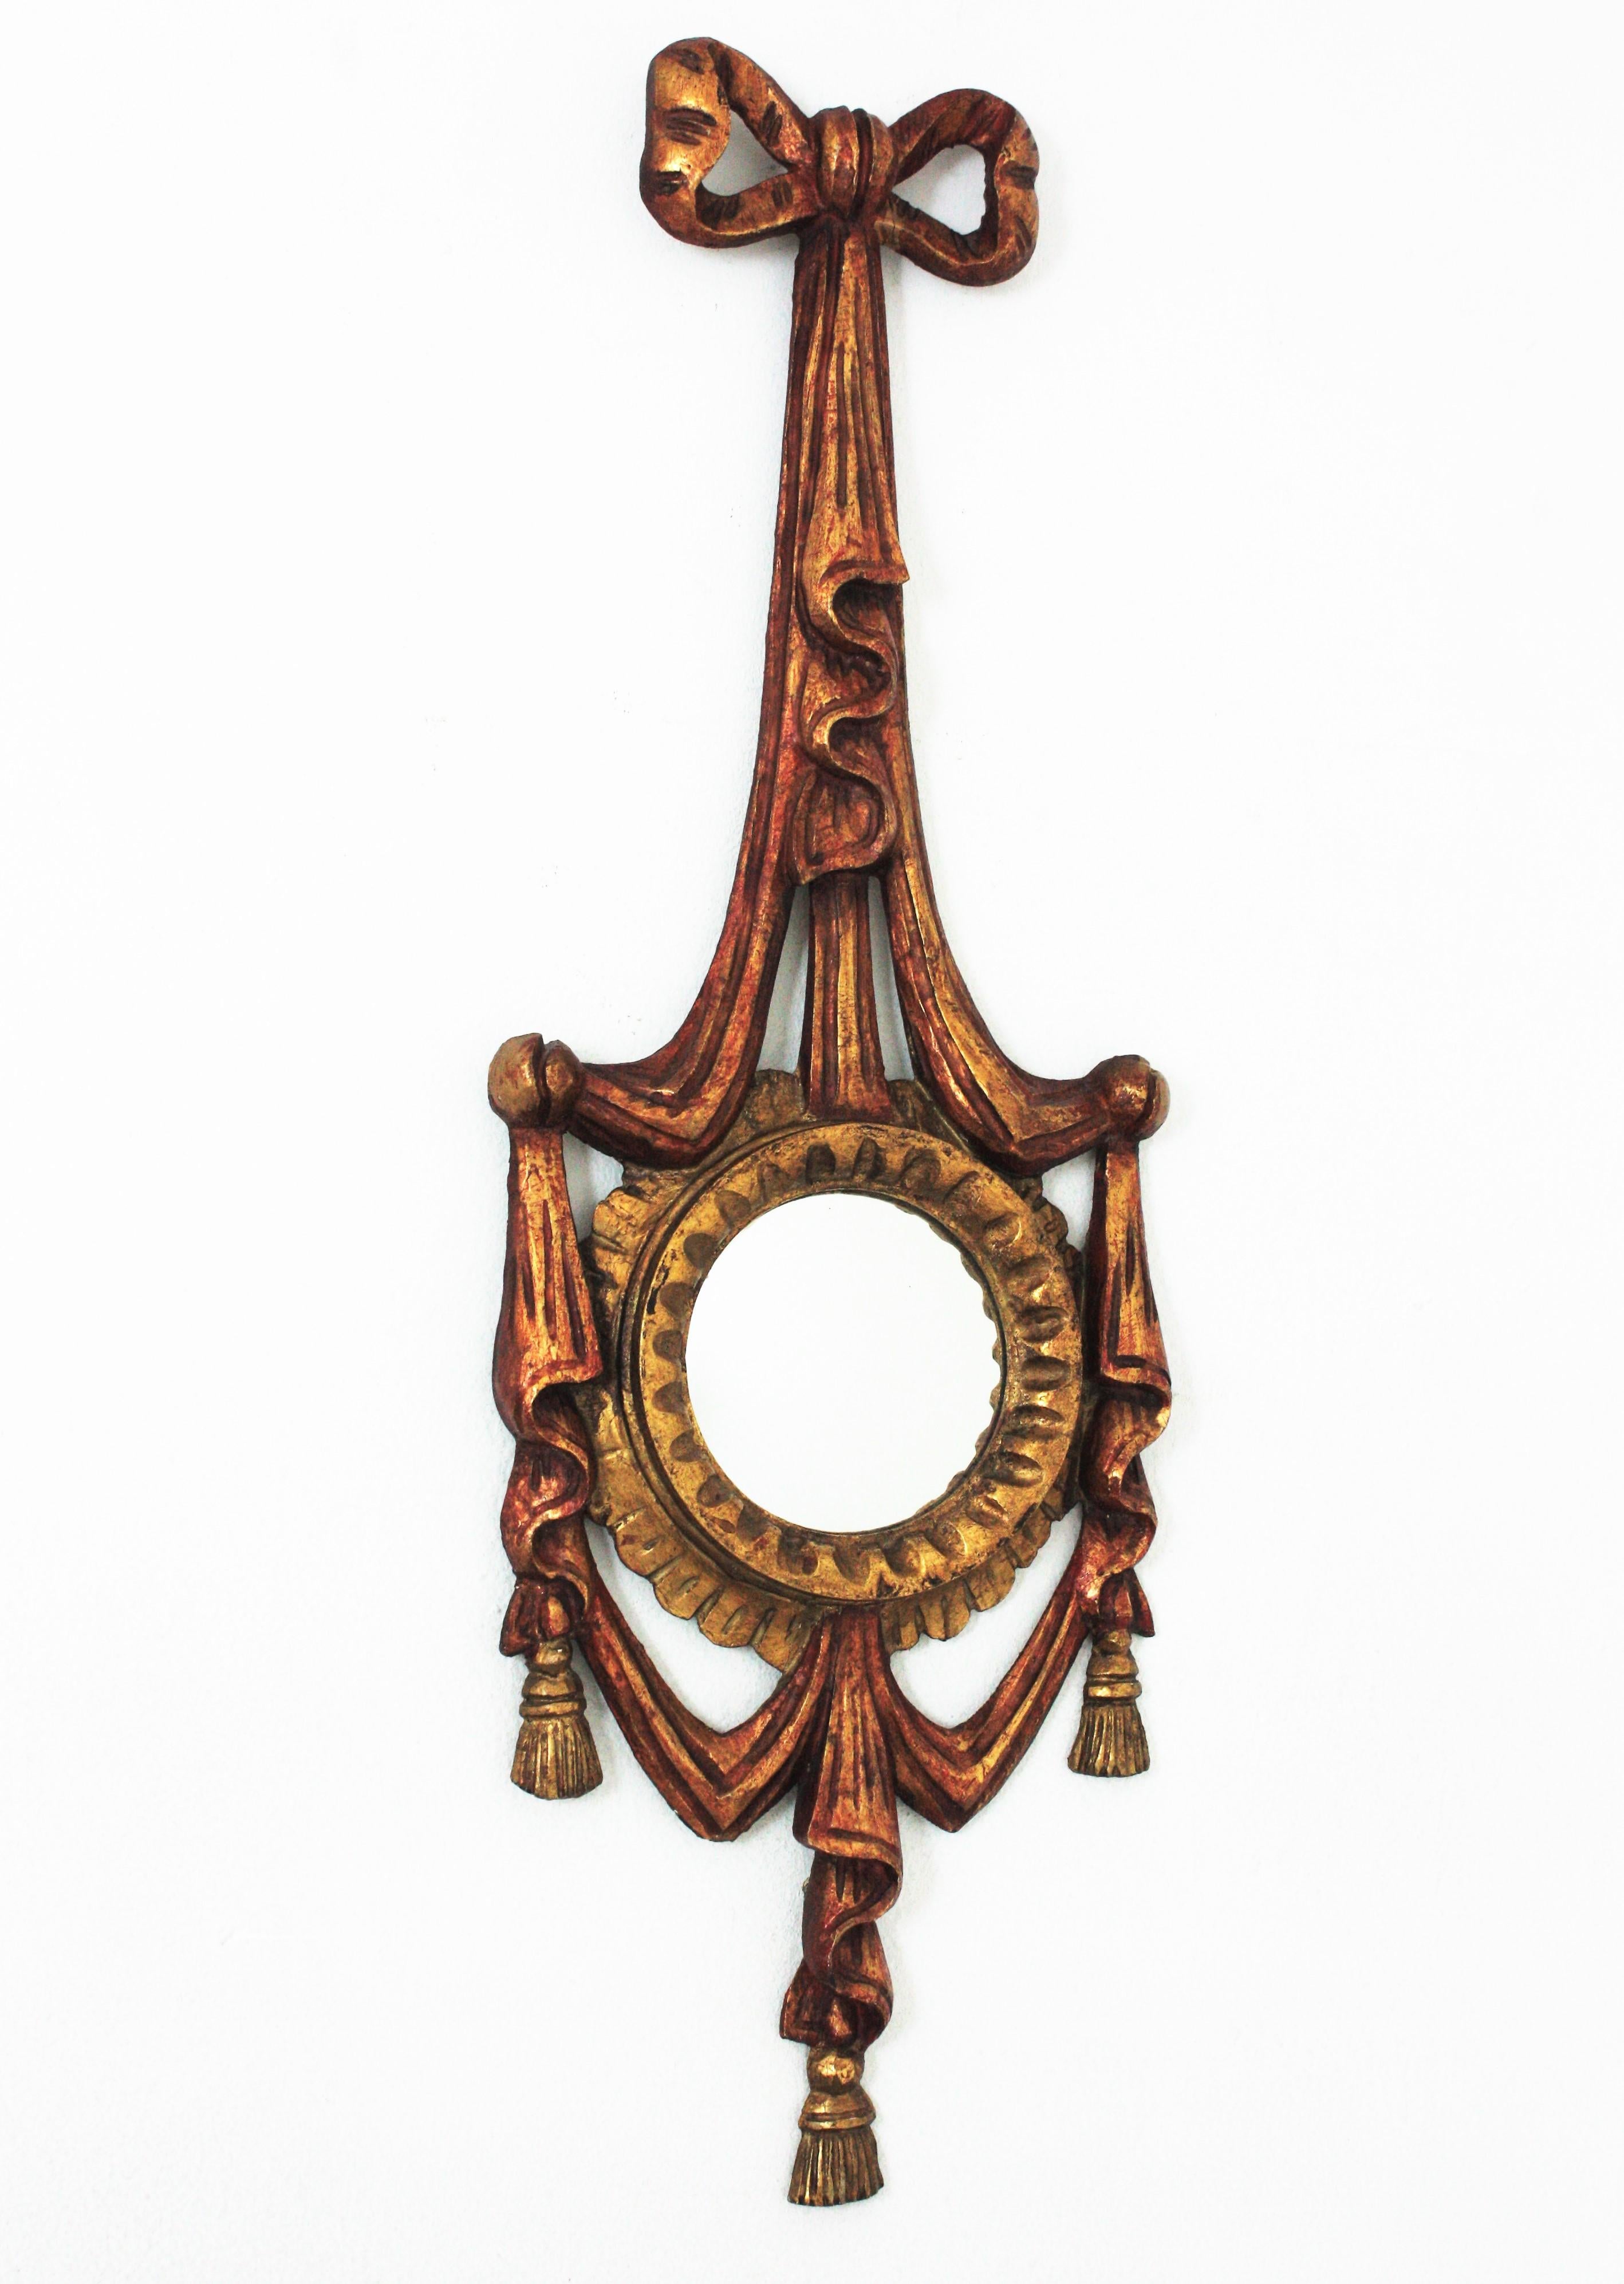 One of a kind carved Giltwood mirror with Ribbon-Tied Details and Bow Pediment. Italy, 1940s
This stuning wall mirror has a convex glass and it is nicely decorated by a bow and ribbon frame in polychromed reddish and golden tones.
Original